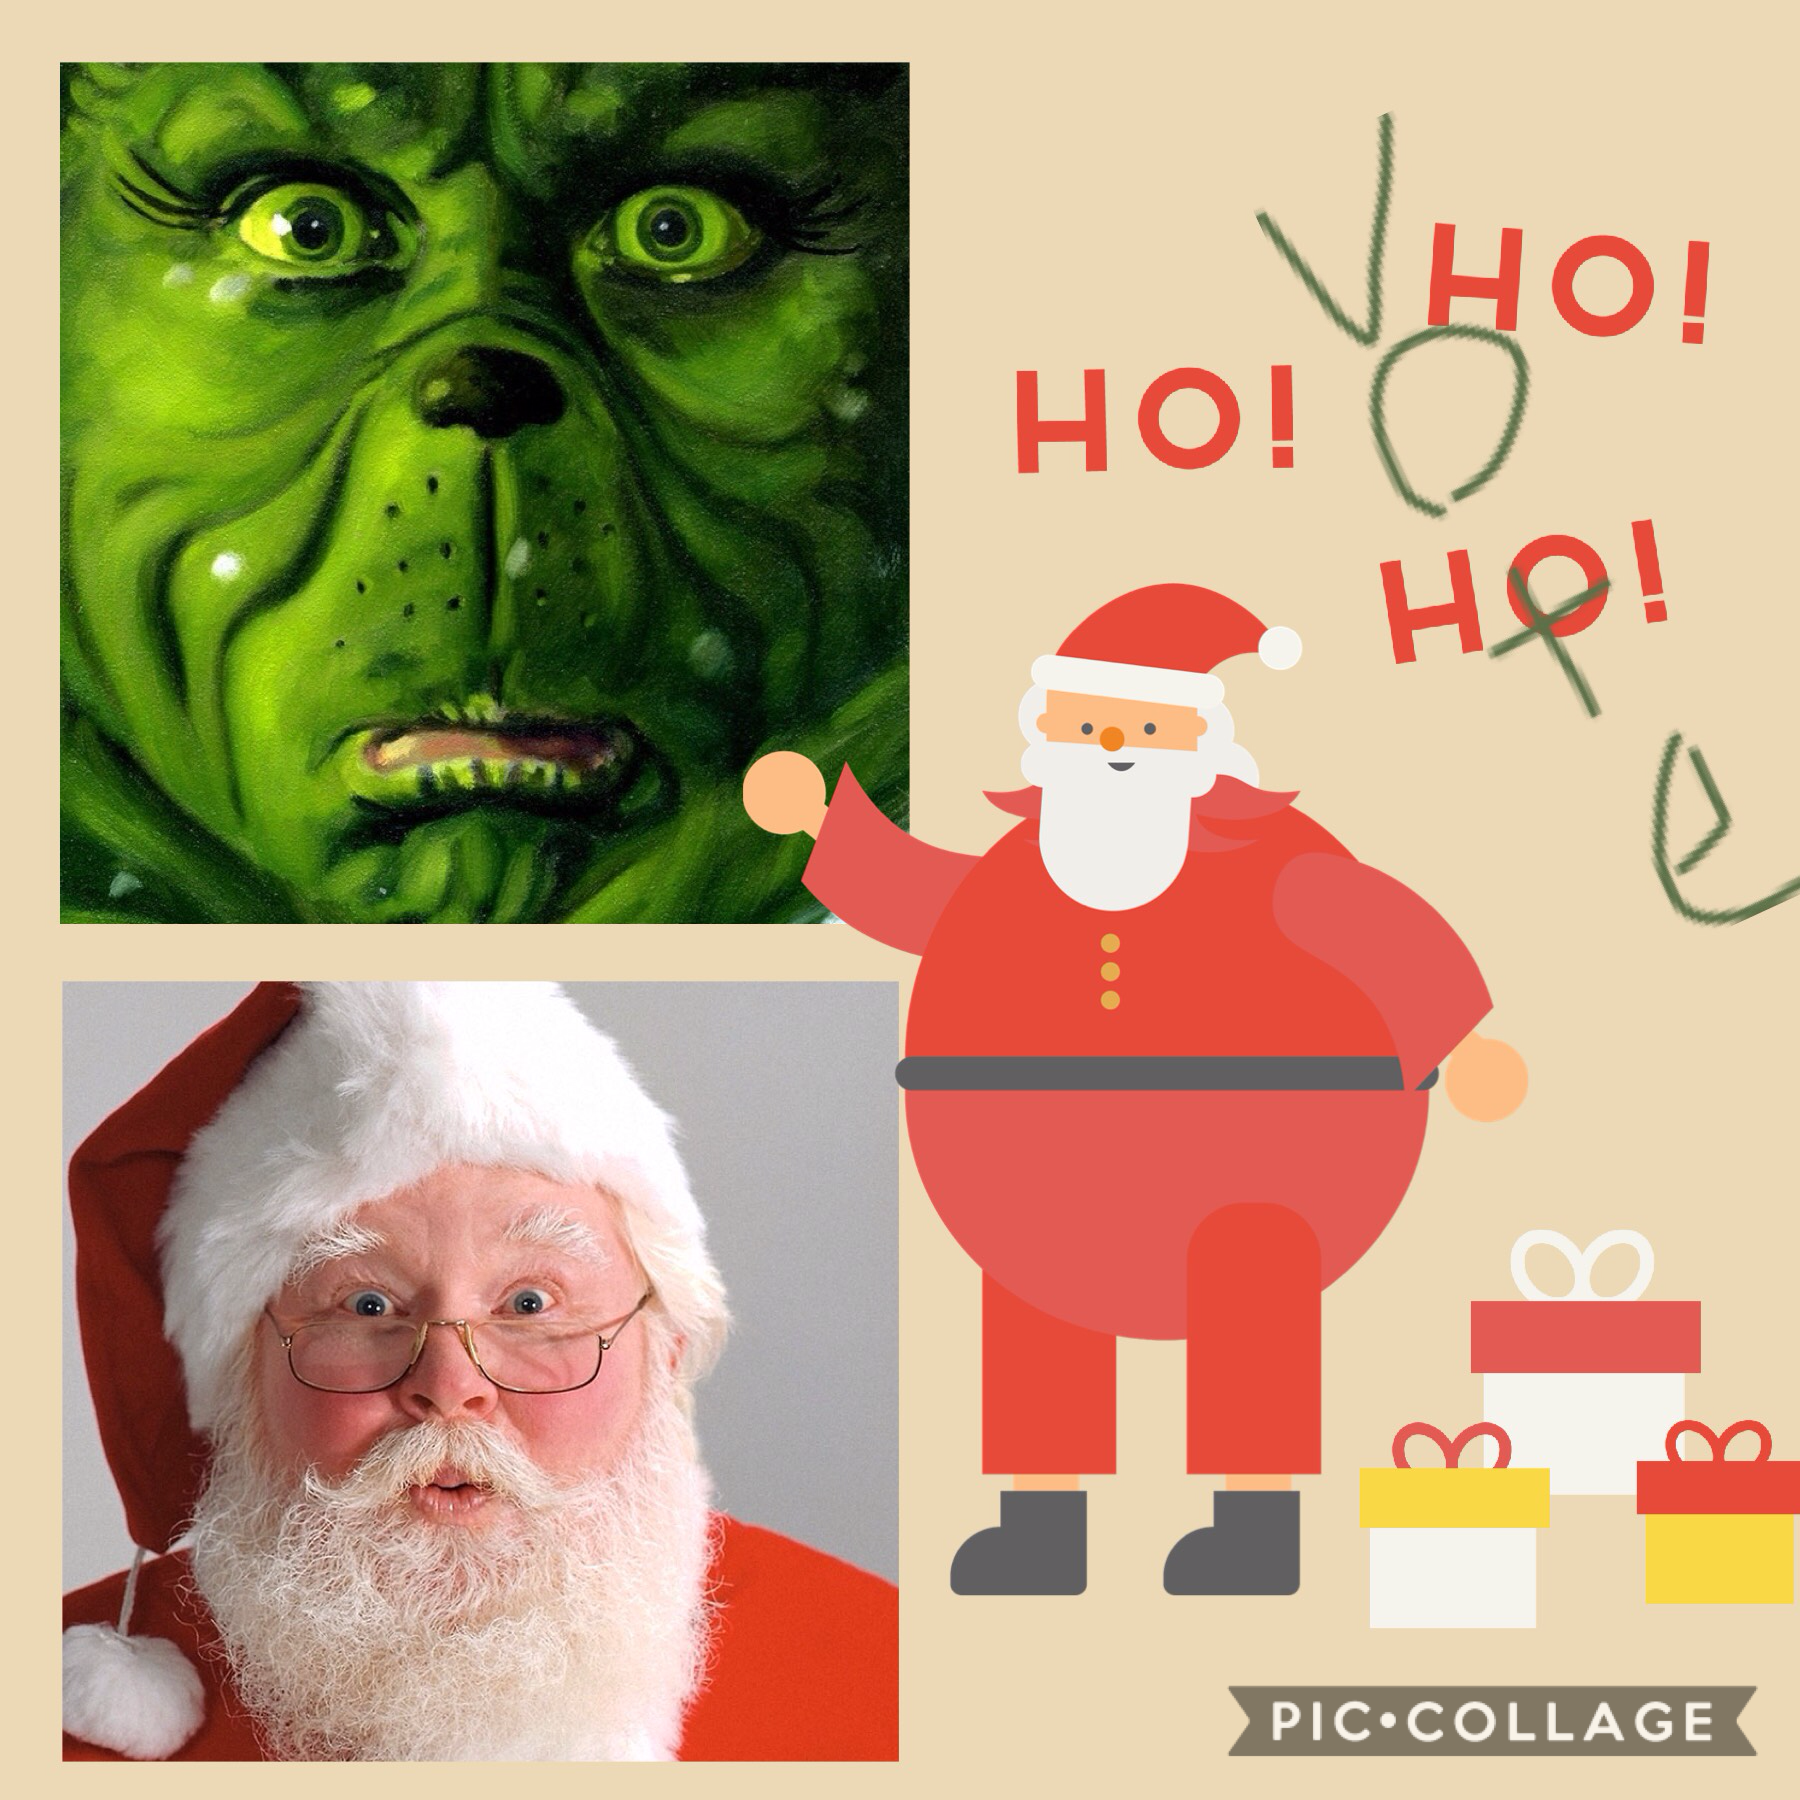 Vote for Santa or the grinch in the comments 